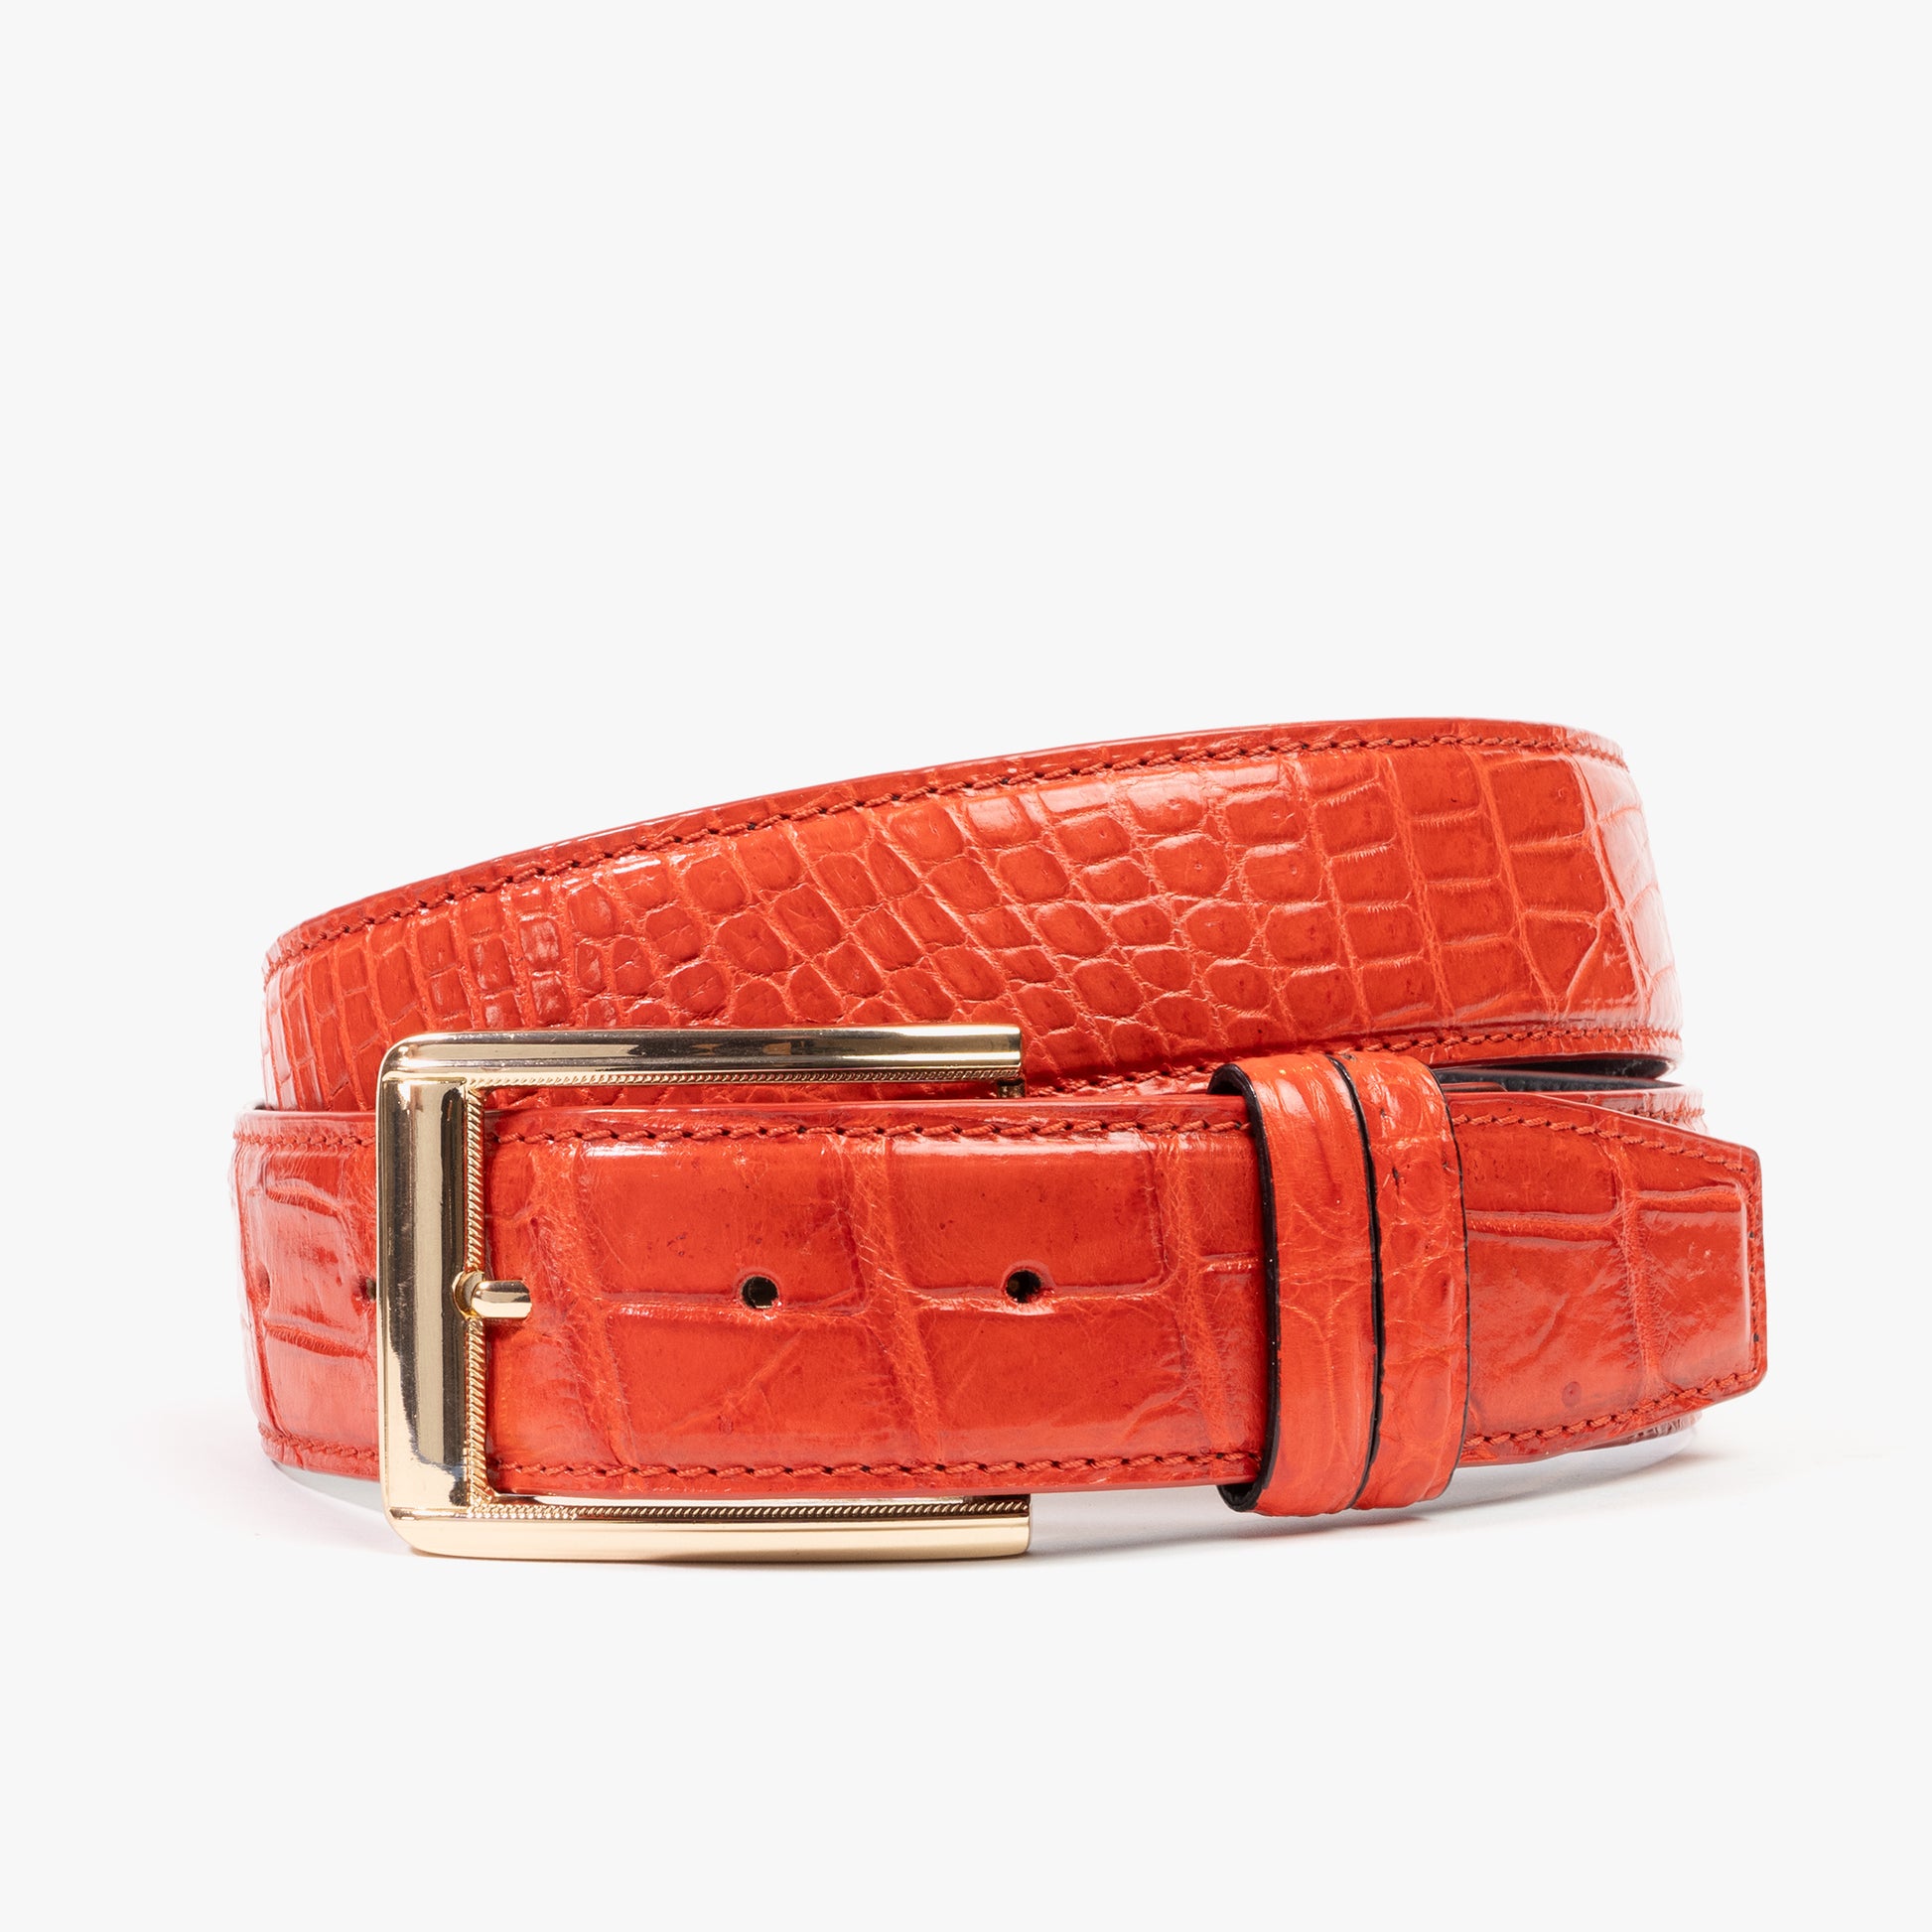 red crocodile belt for men with gold buckle 